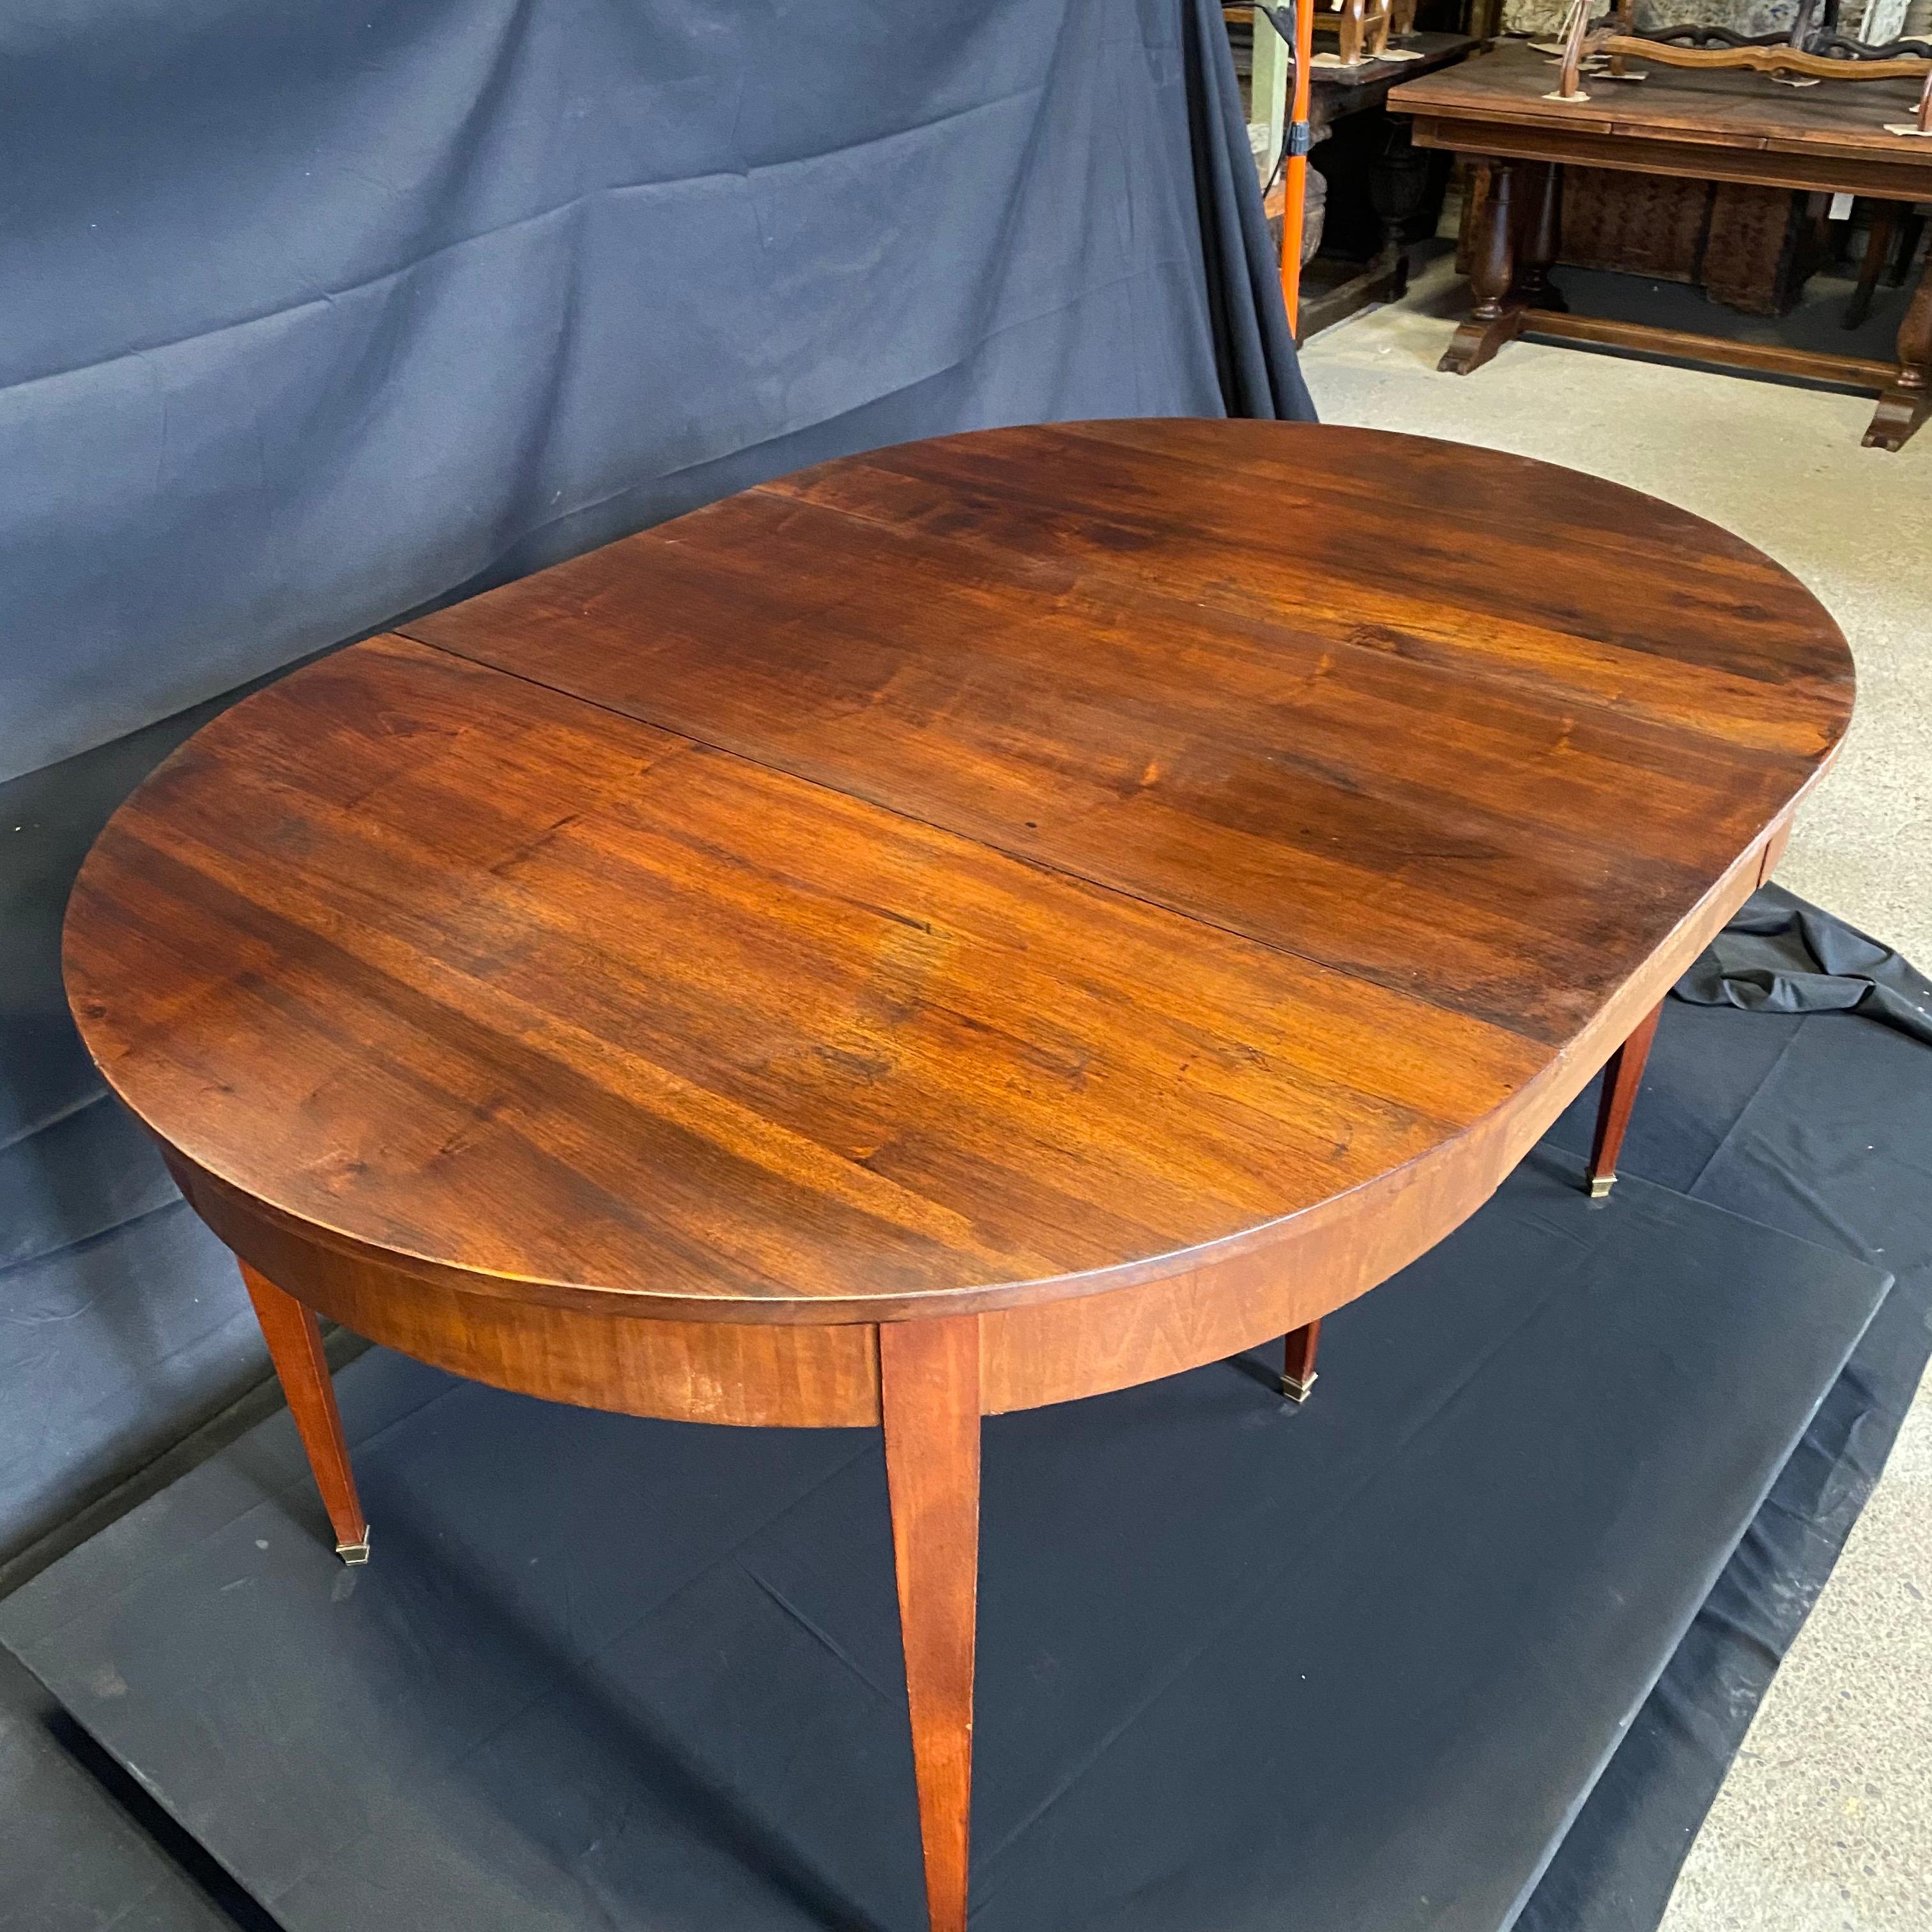 Lovely round or when expanded, oval Louis XVI table from Lyon, France could serve many uses: as an entry or statement table, as a lovely floating desk, as a smaller round dining table for 4, or expanded to a 63